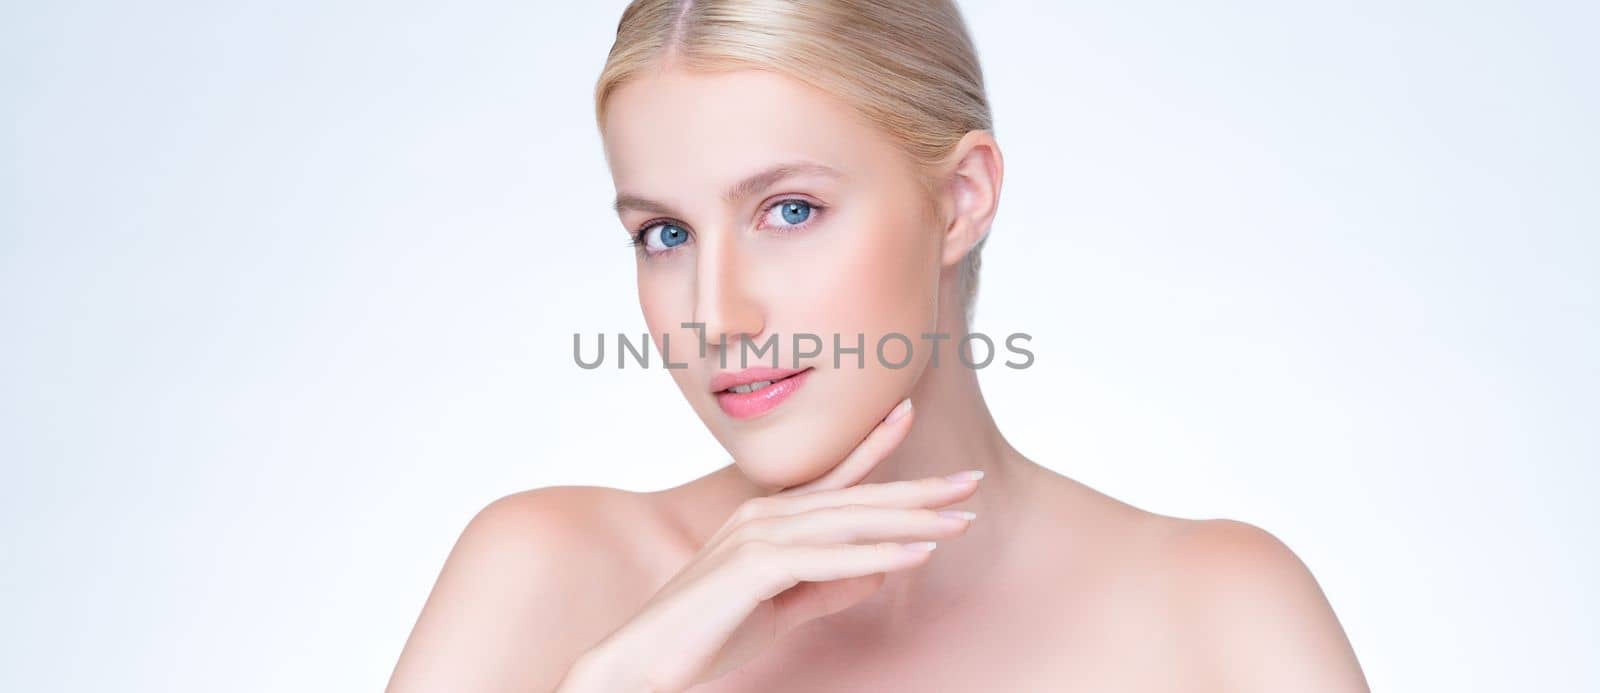 Personable beautiful woman with perfect smooth skin portrait. by biancoblue